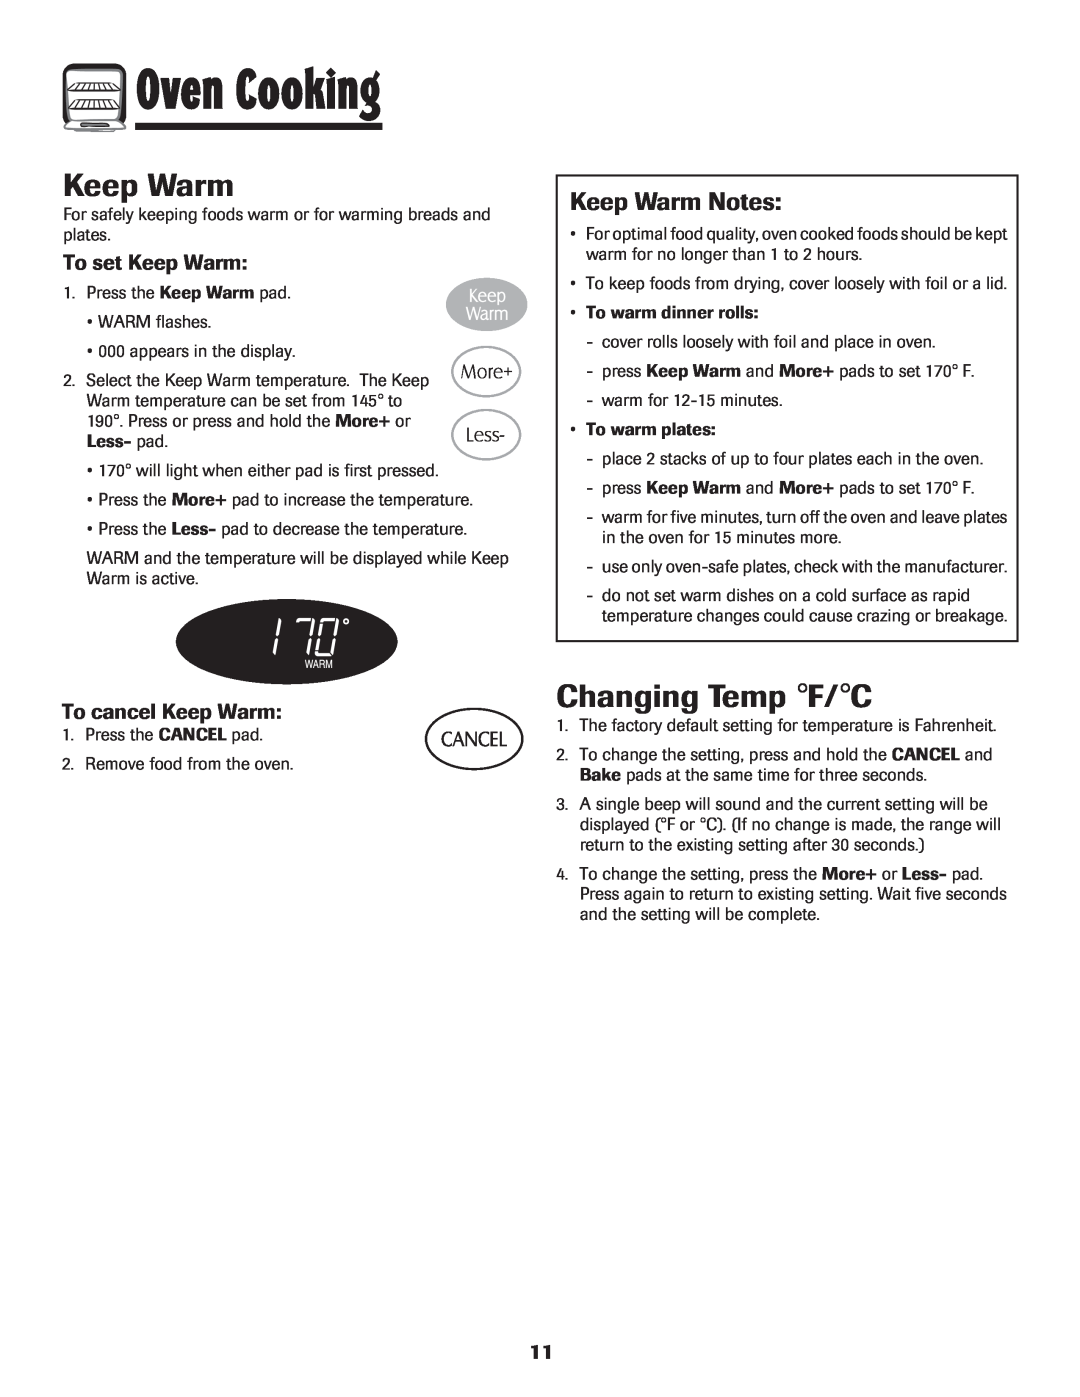 Maytag MES5752BAW manual Changing Temp F/C, Keep Warm Notes, To set Keep Warm, To cancel Keep Warm, Oven Cooking 